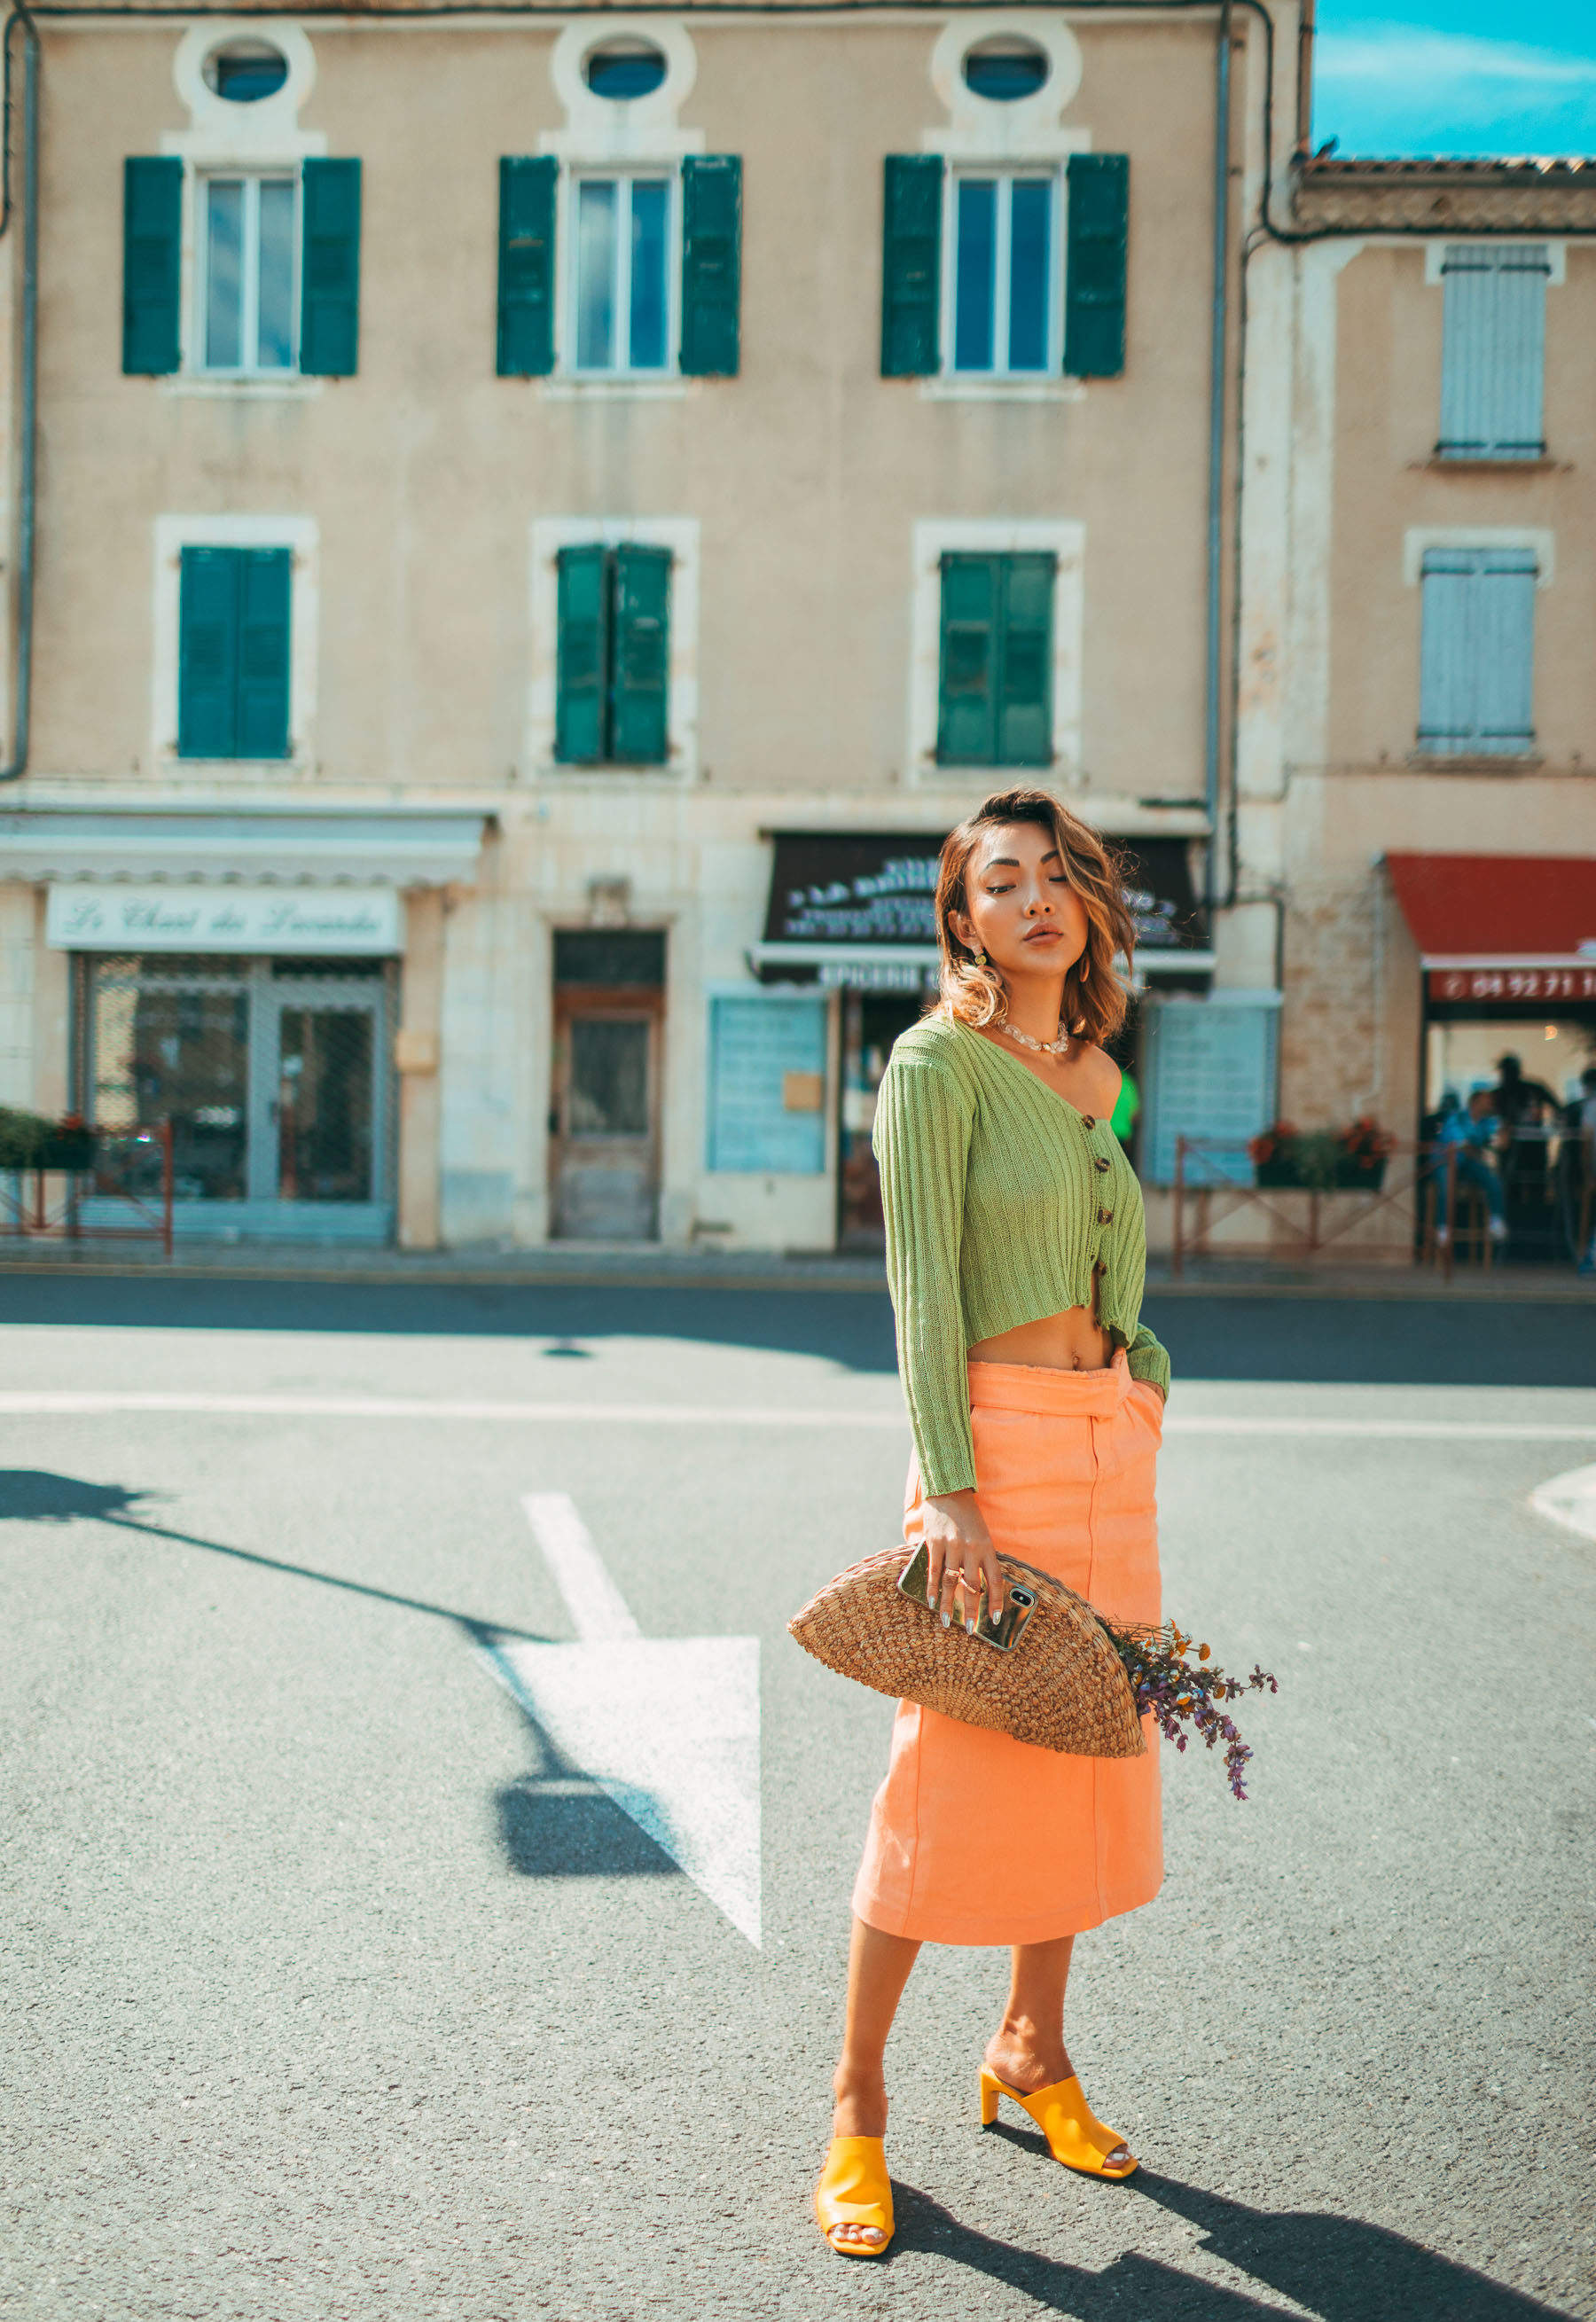 Preconceptions to Throw Away and Live Life at Your Own Pace // color block outfit, fashion in provence // Notjessfashion.com